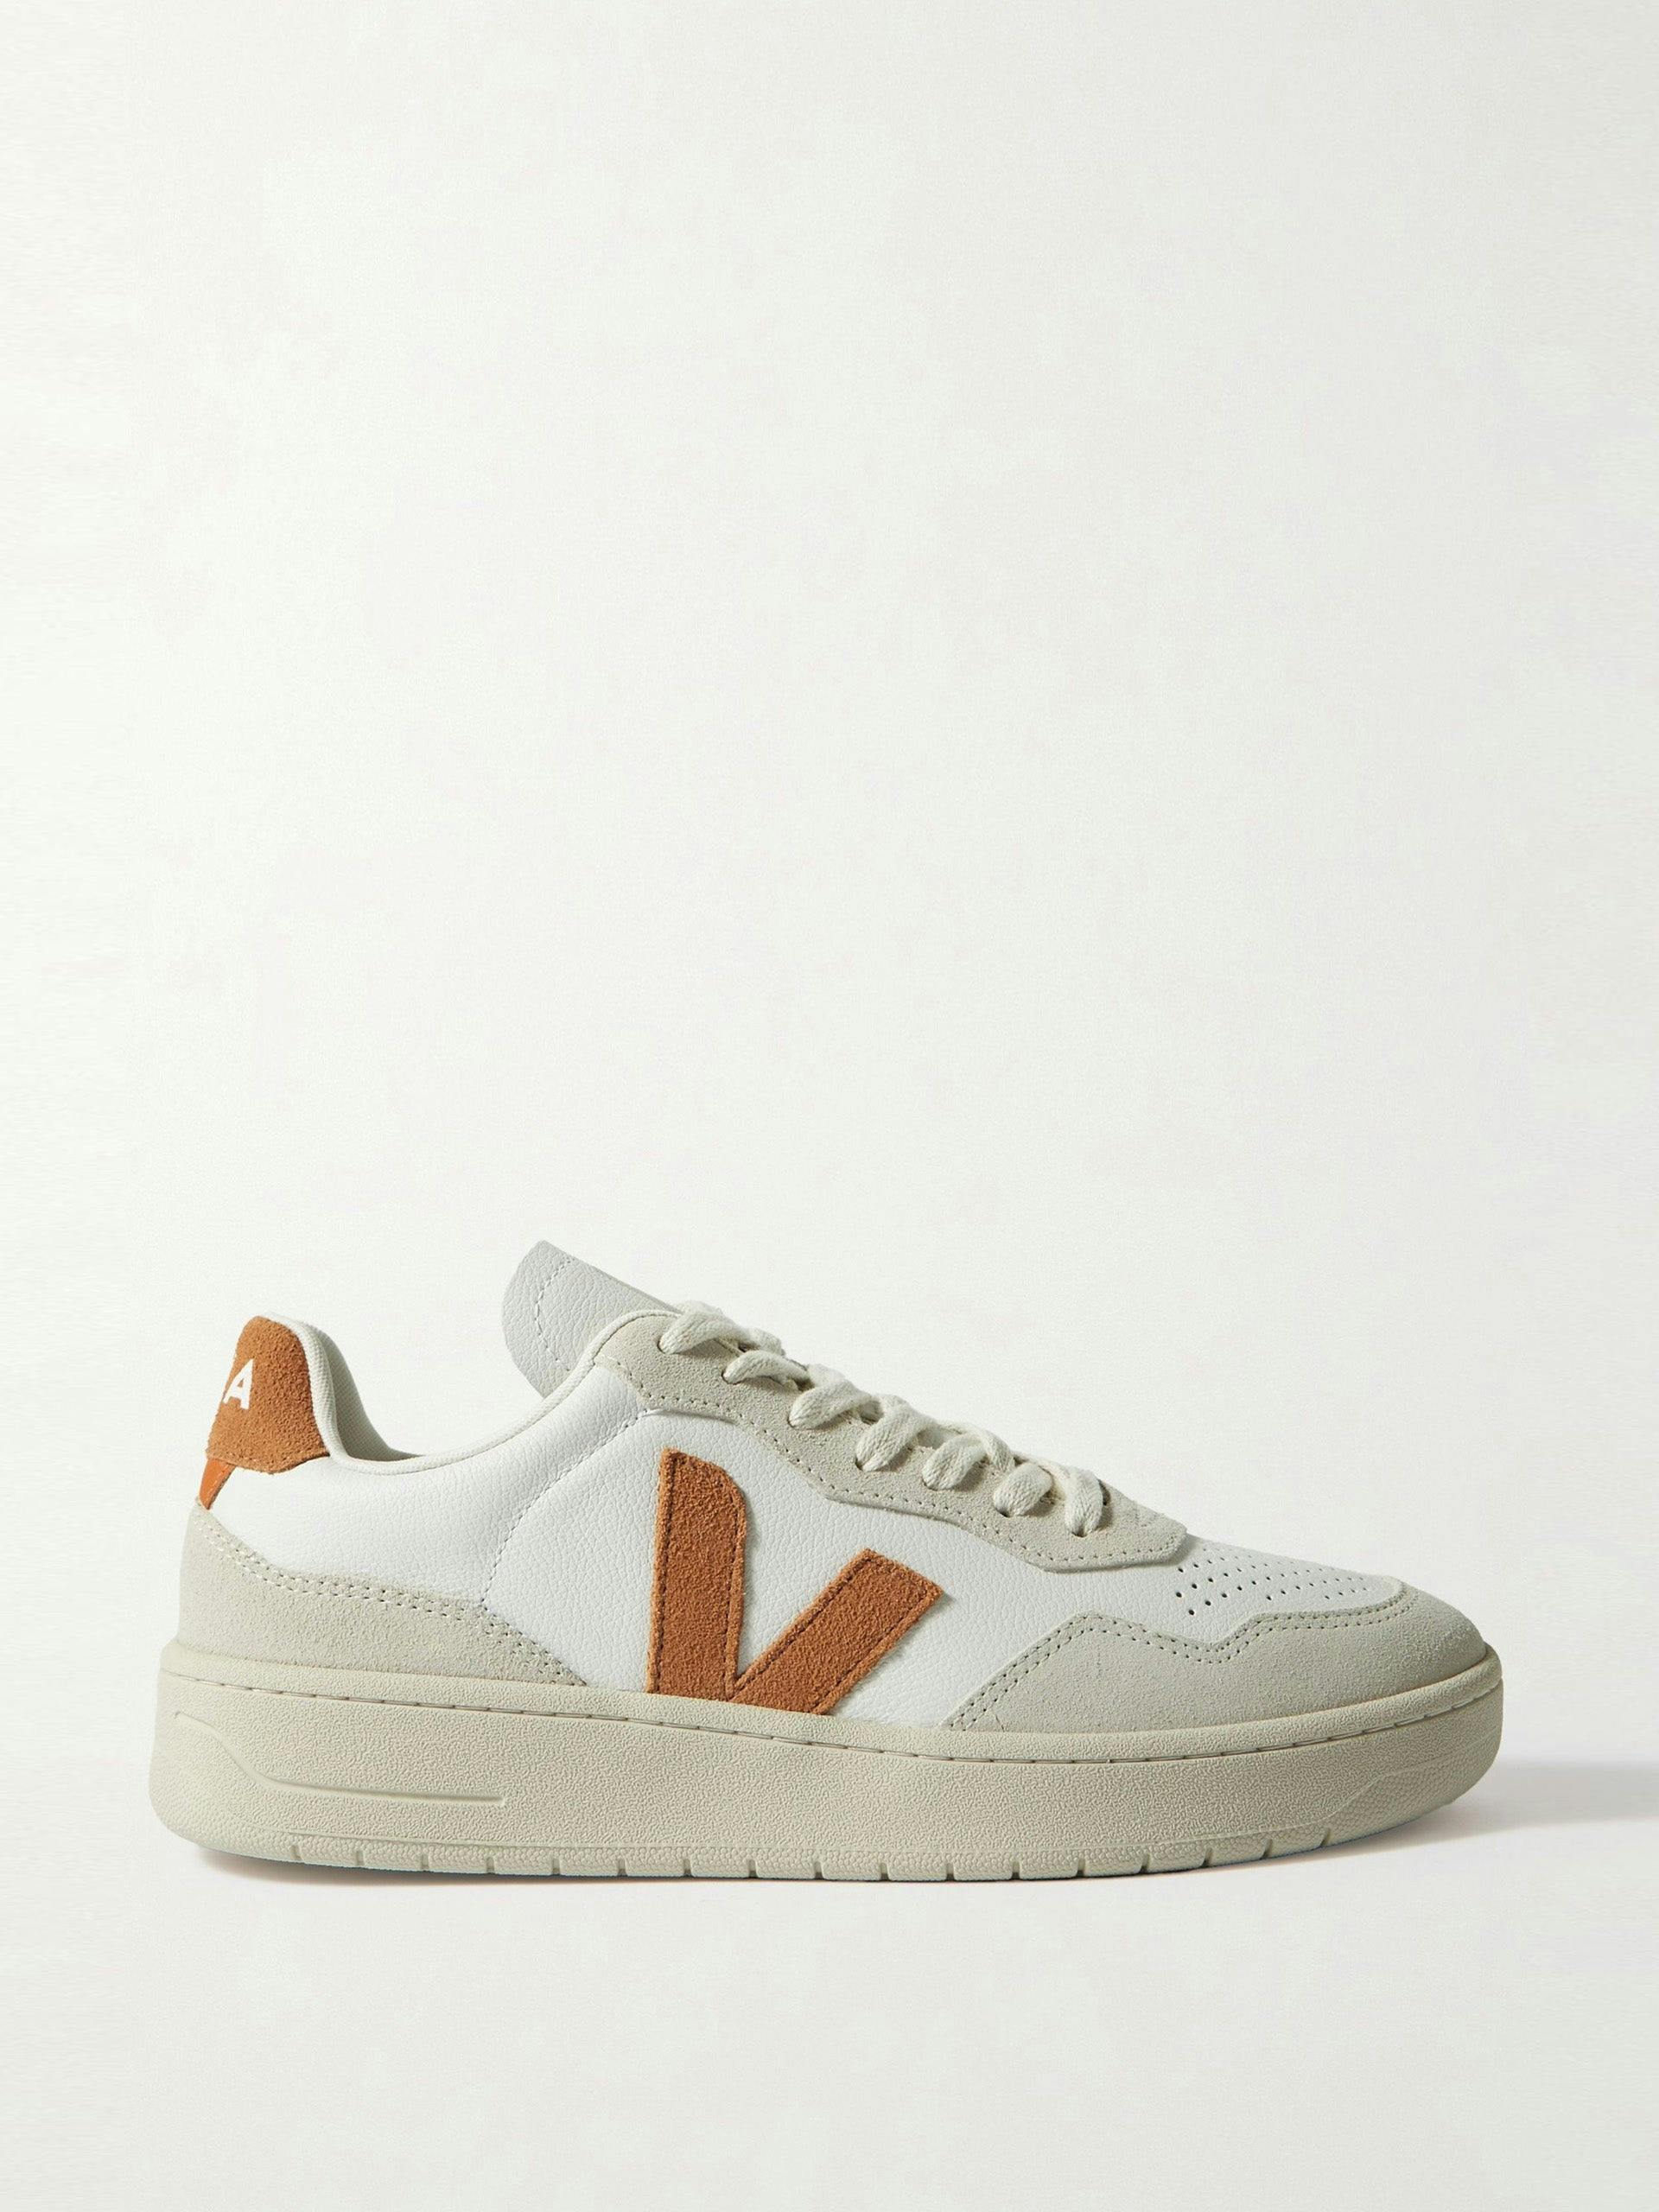 V-90 suede and leather sneakers